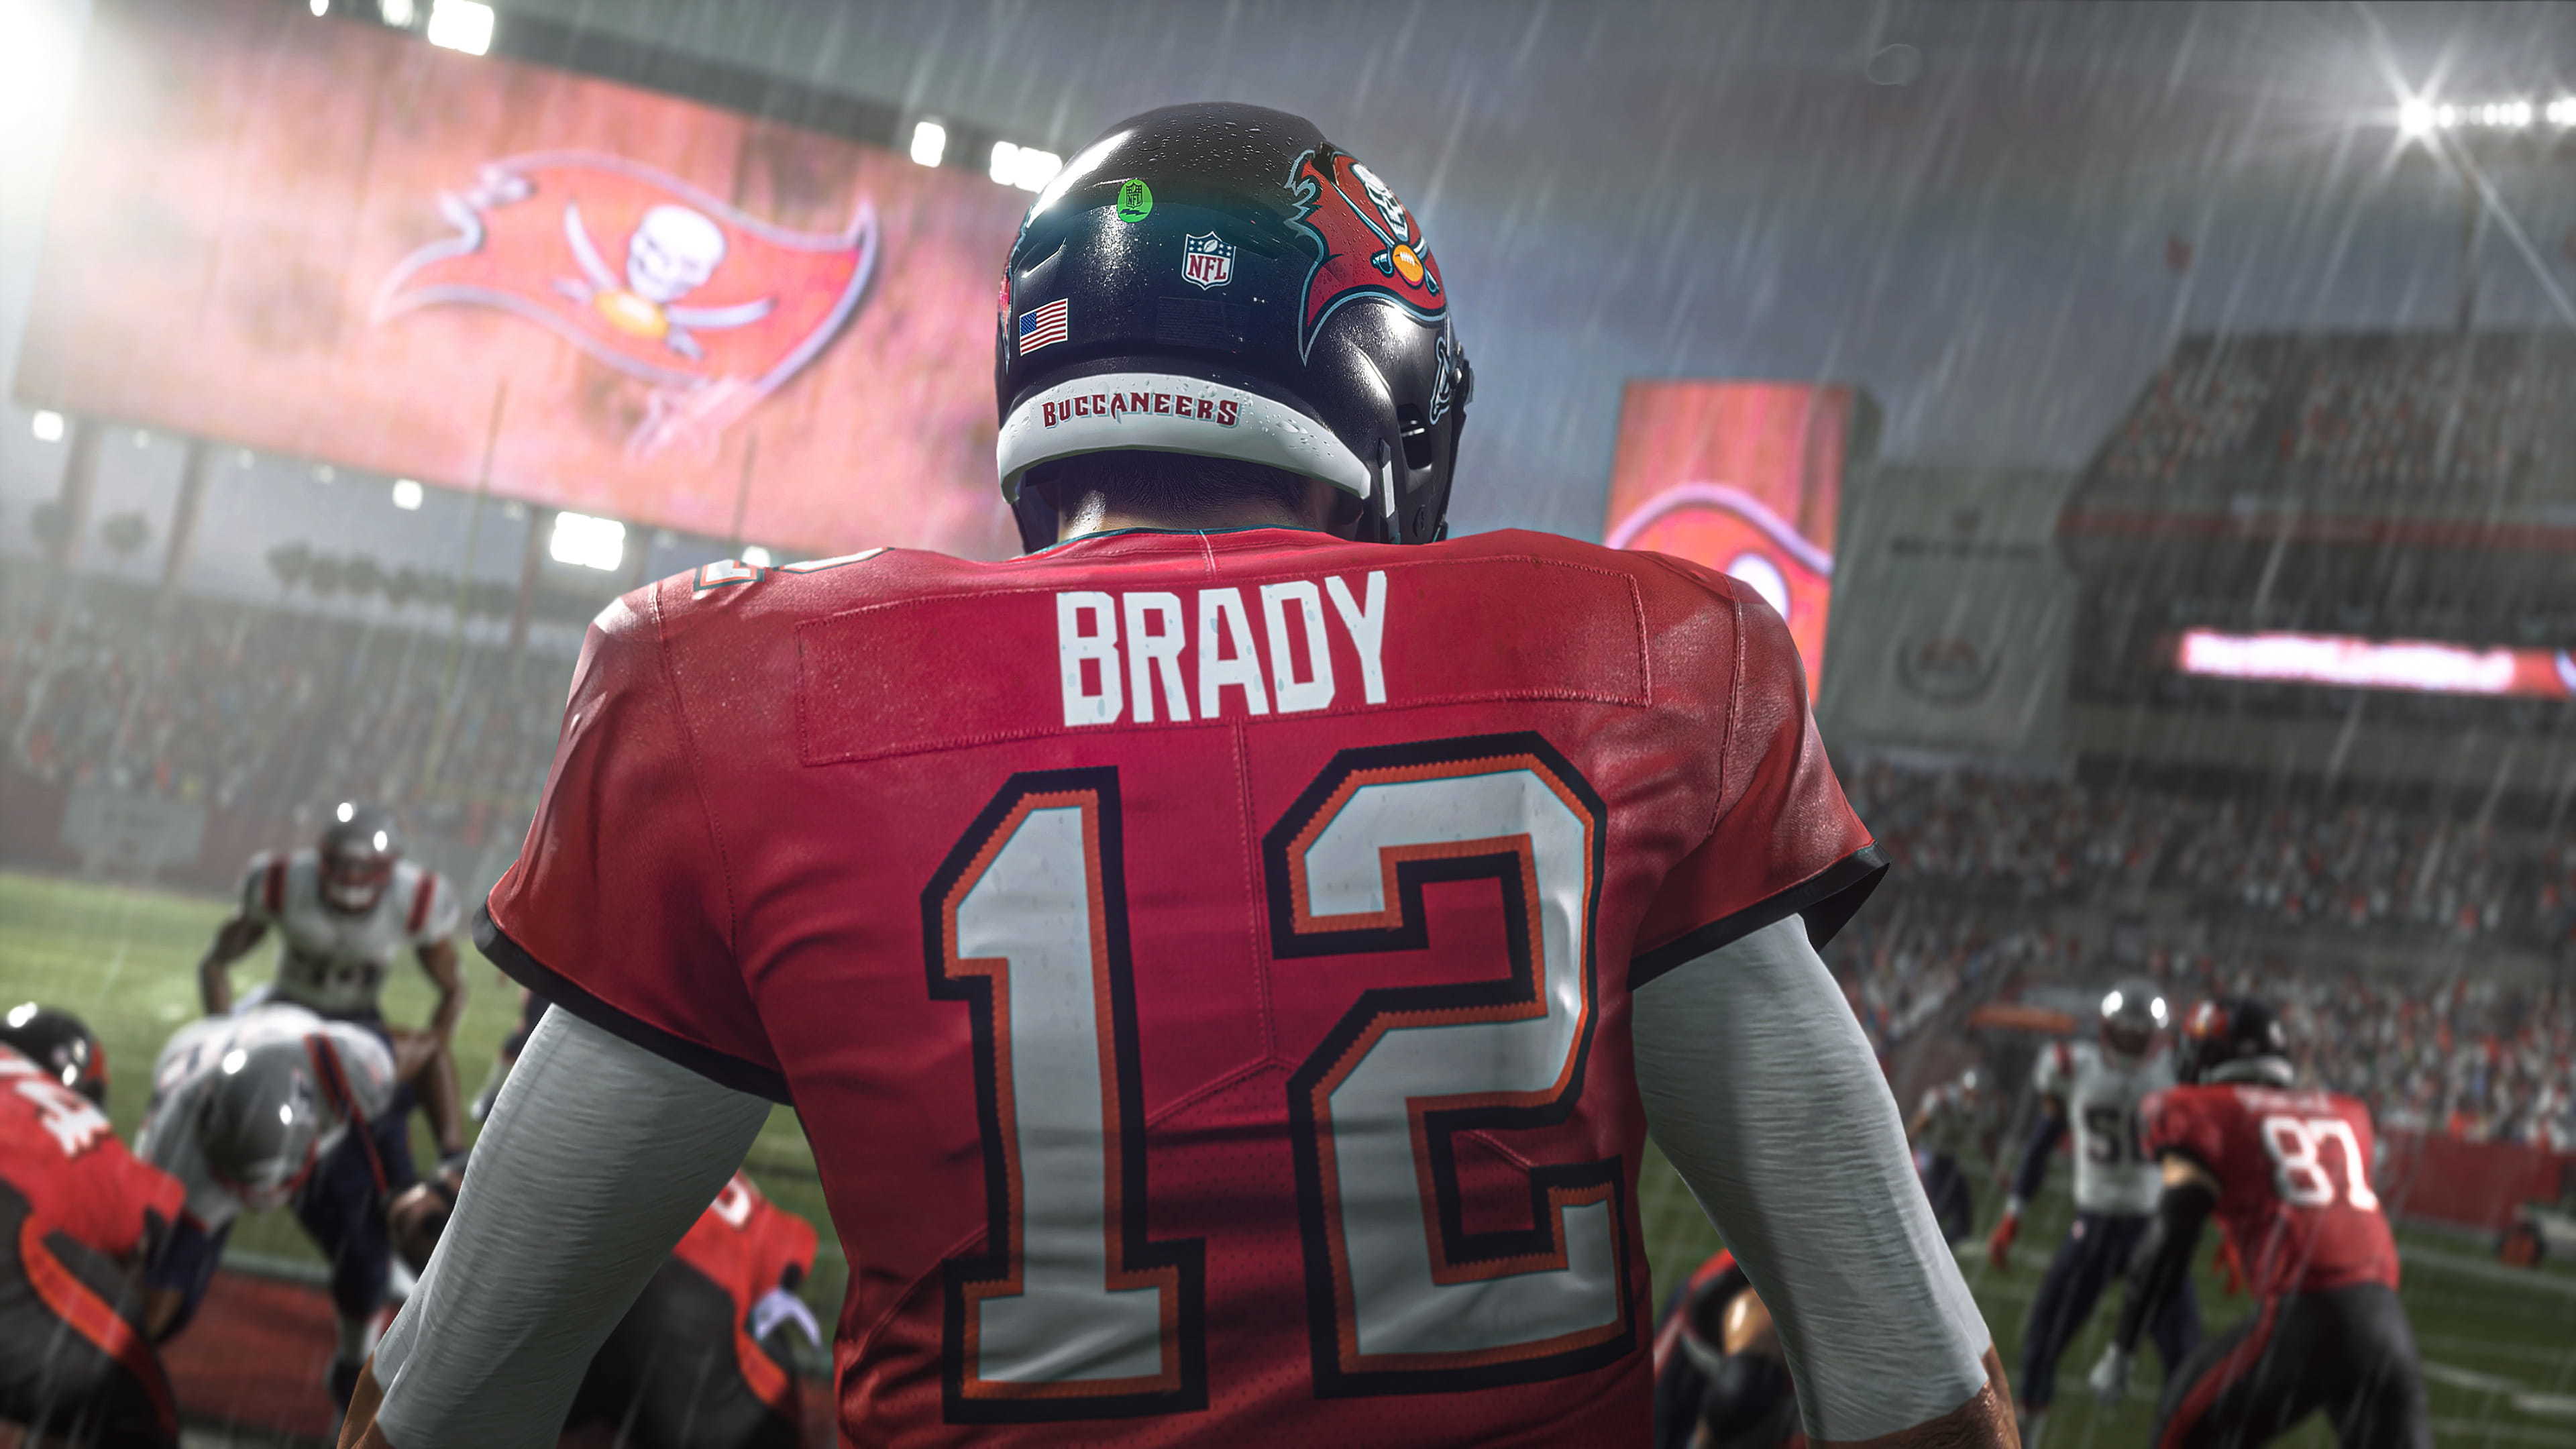 Madden 21 And FIFA 21 Look Stunning In These New 4K Image